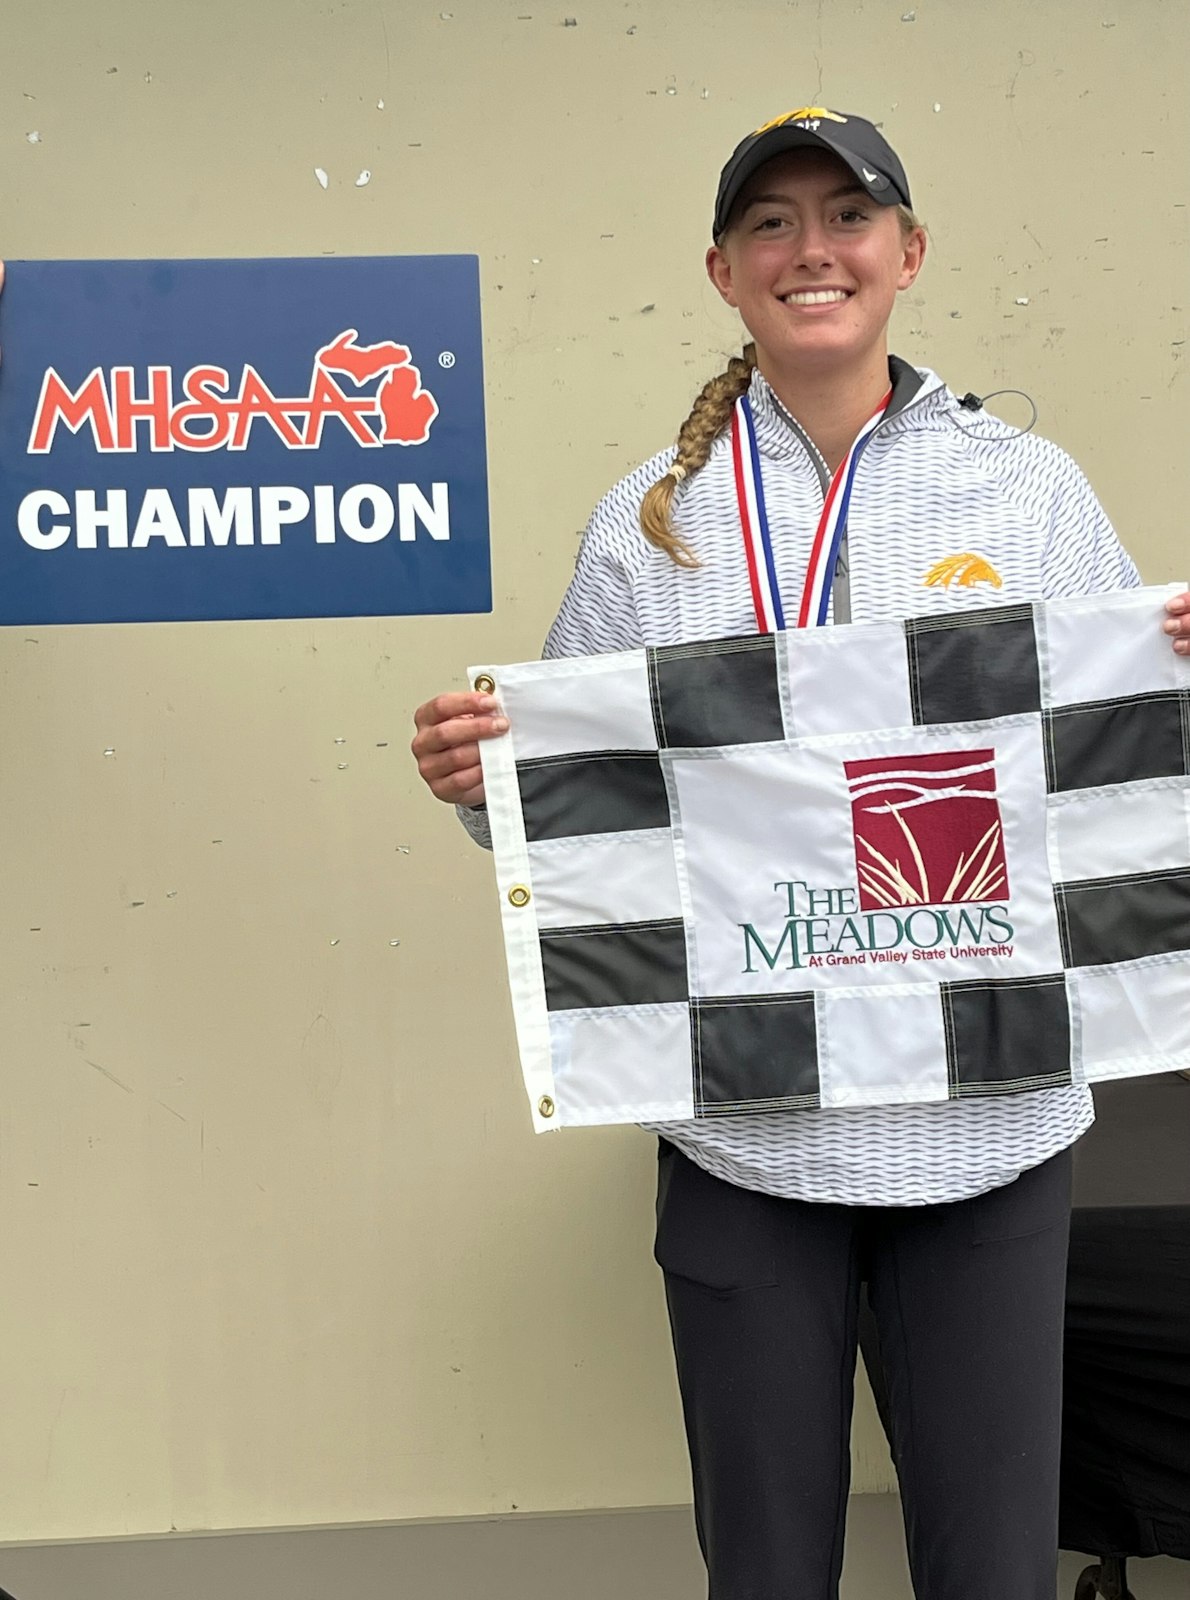 Lauren Timpf, a senior at Macomb Lutheran North, a three-peat Division 3 medalist, is regarded as one of the most accomplished champions in MHSAA golf history. She is committed to Purdue University. (Photo courtesy of Ryan Timpf)